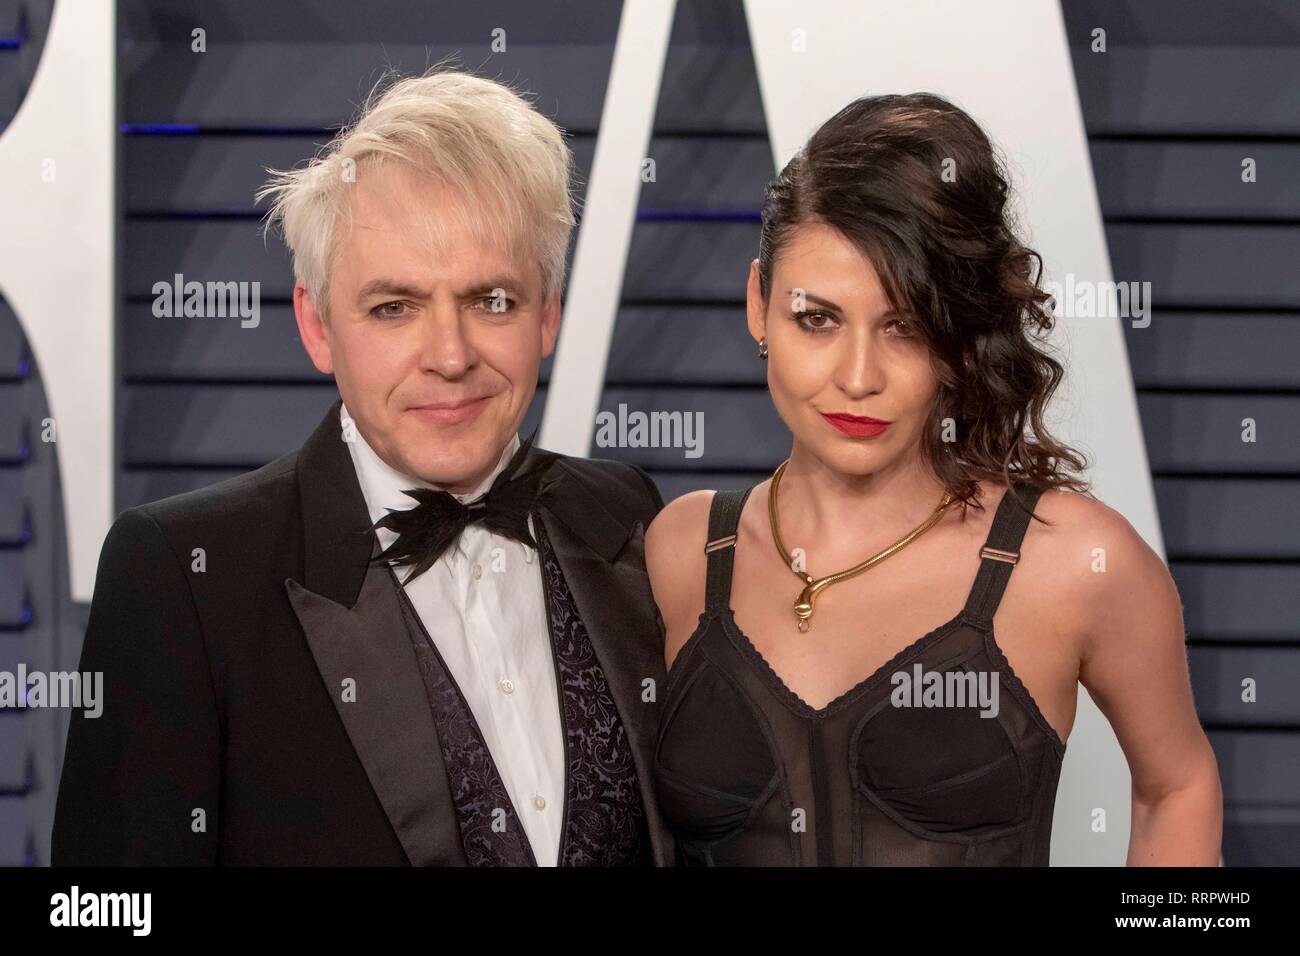 Nick Rhodes and Nefer Suvio attend the Vanity Fair Oscar Party at Wallis Annenberg Center for the Performing Arts in Beverly Hills, Los Angeles, USA, on 24 February 2019. | usage worldwide Stock Photo